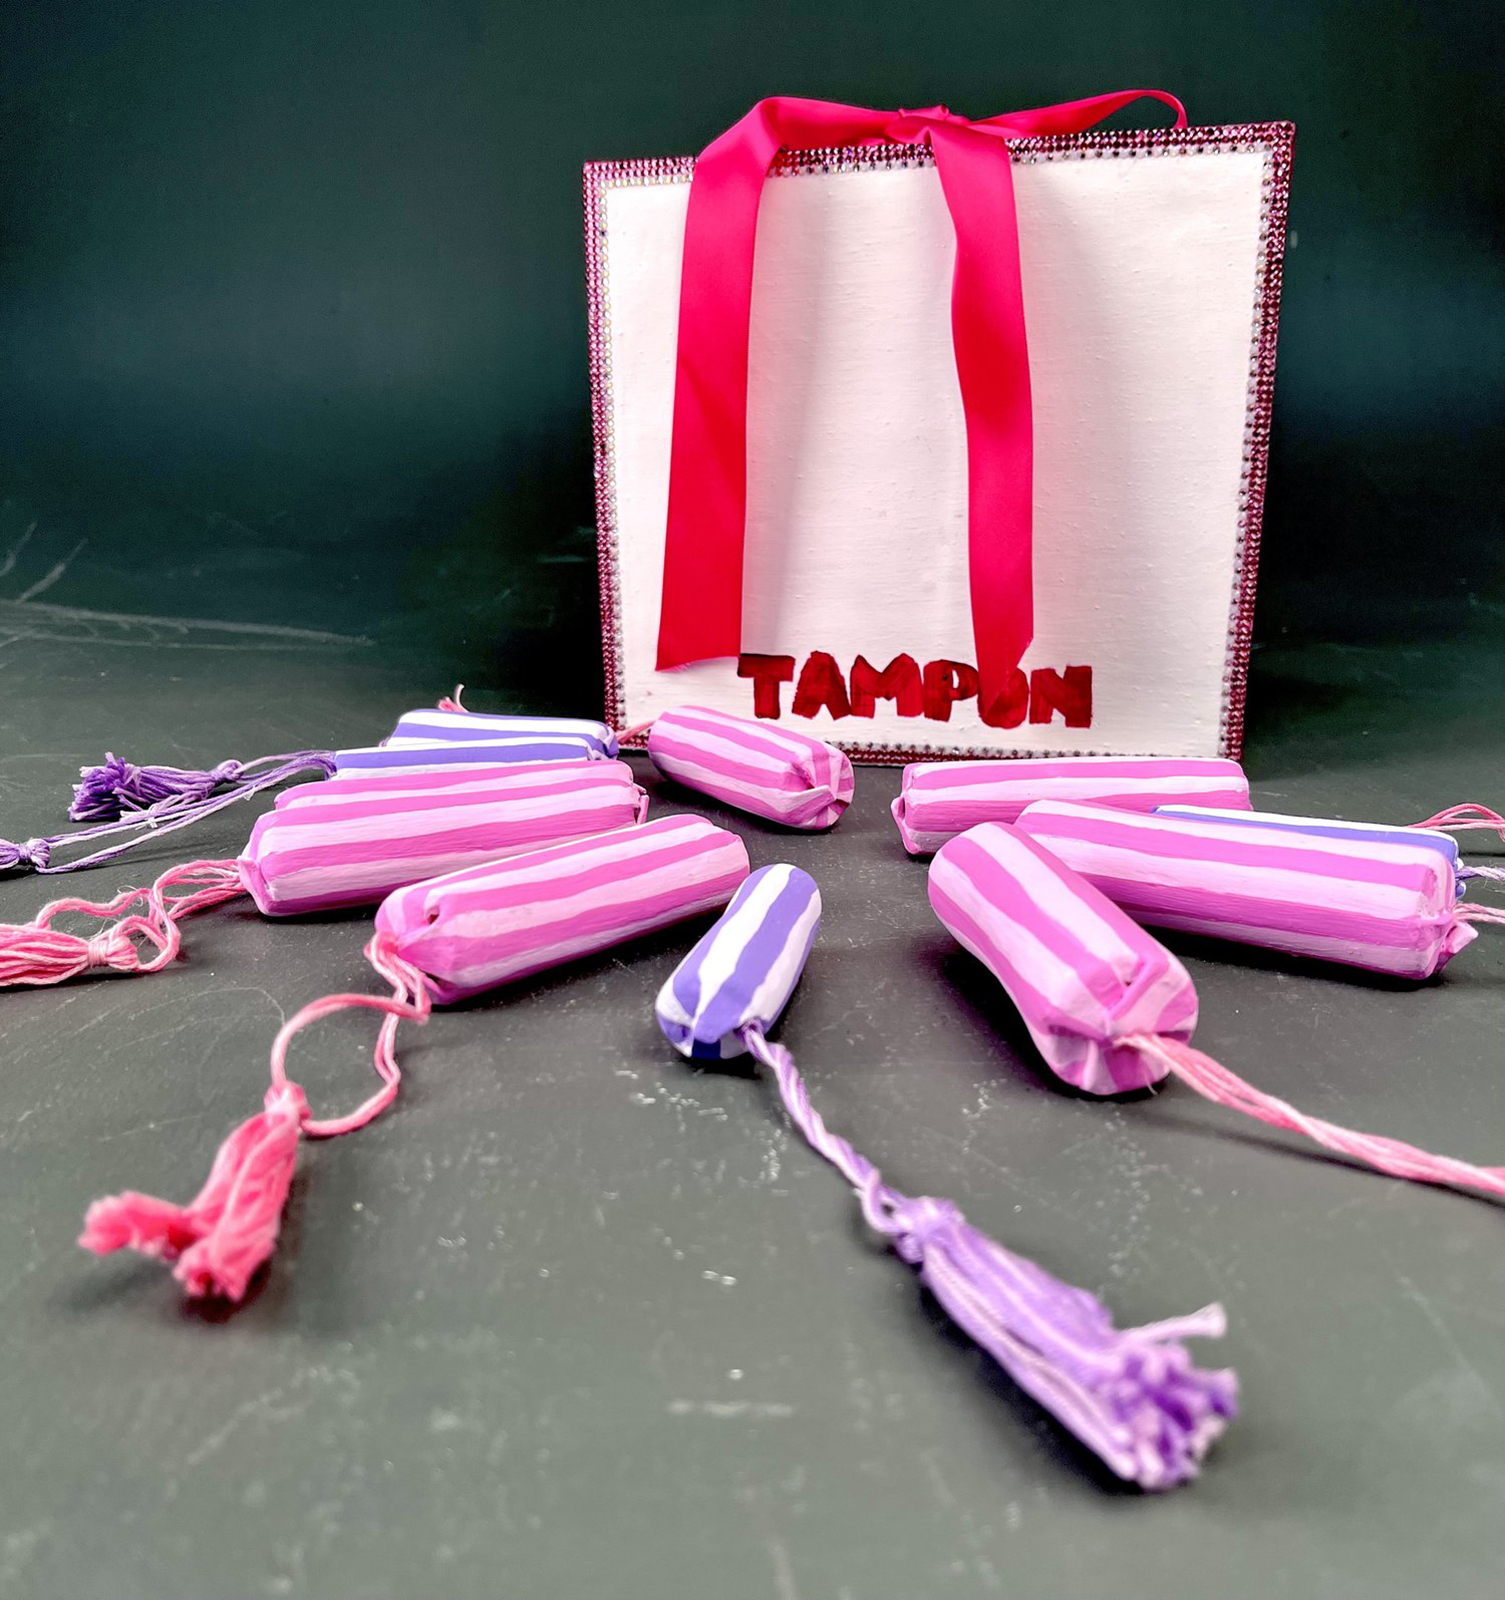 A bag with the word "Tampax" and several ceramic and fabric tampons on the table in front of it, courtesy of the artist